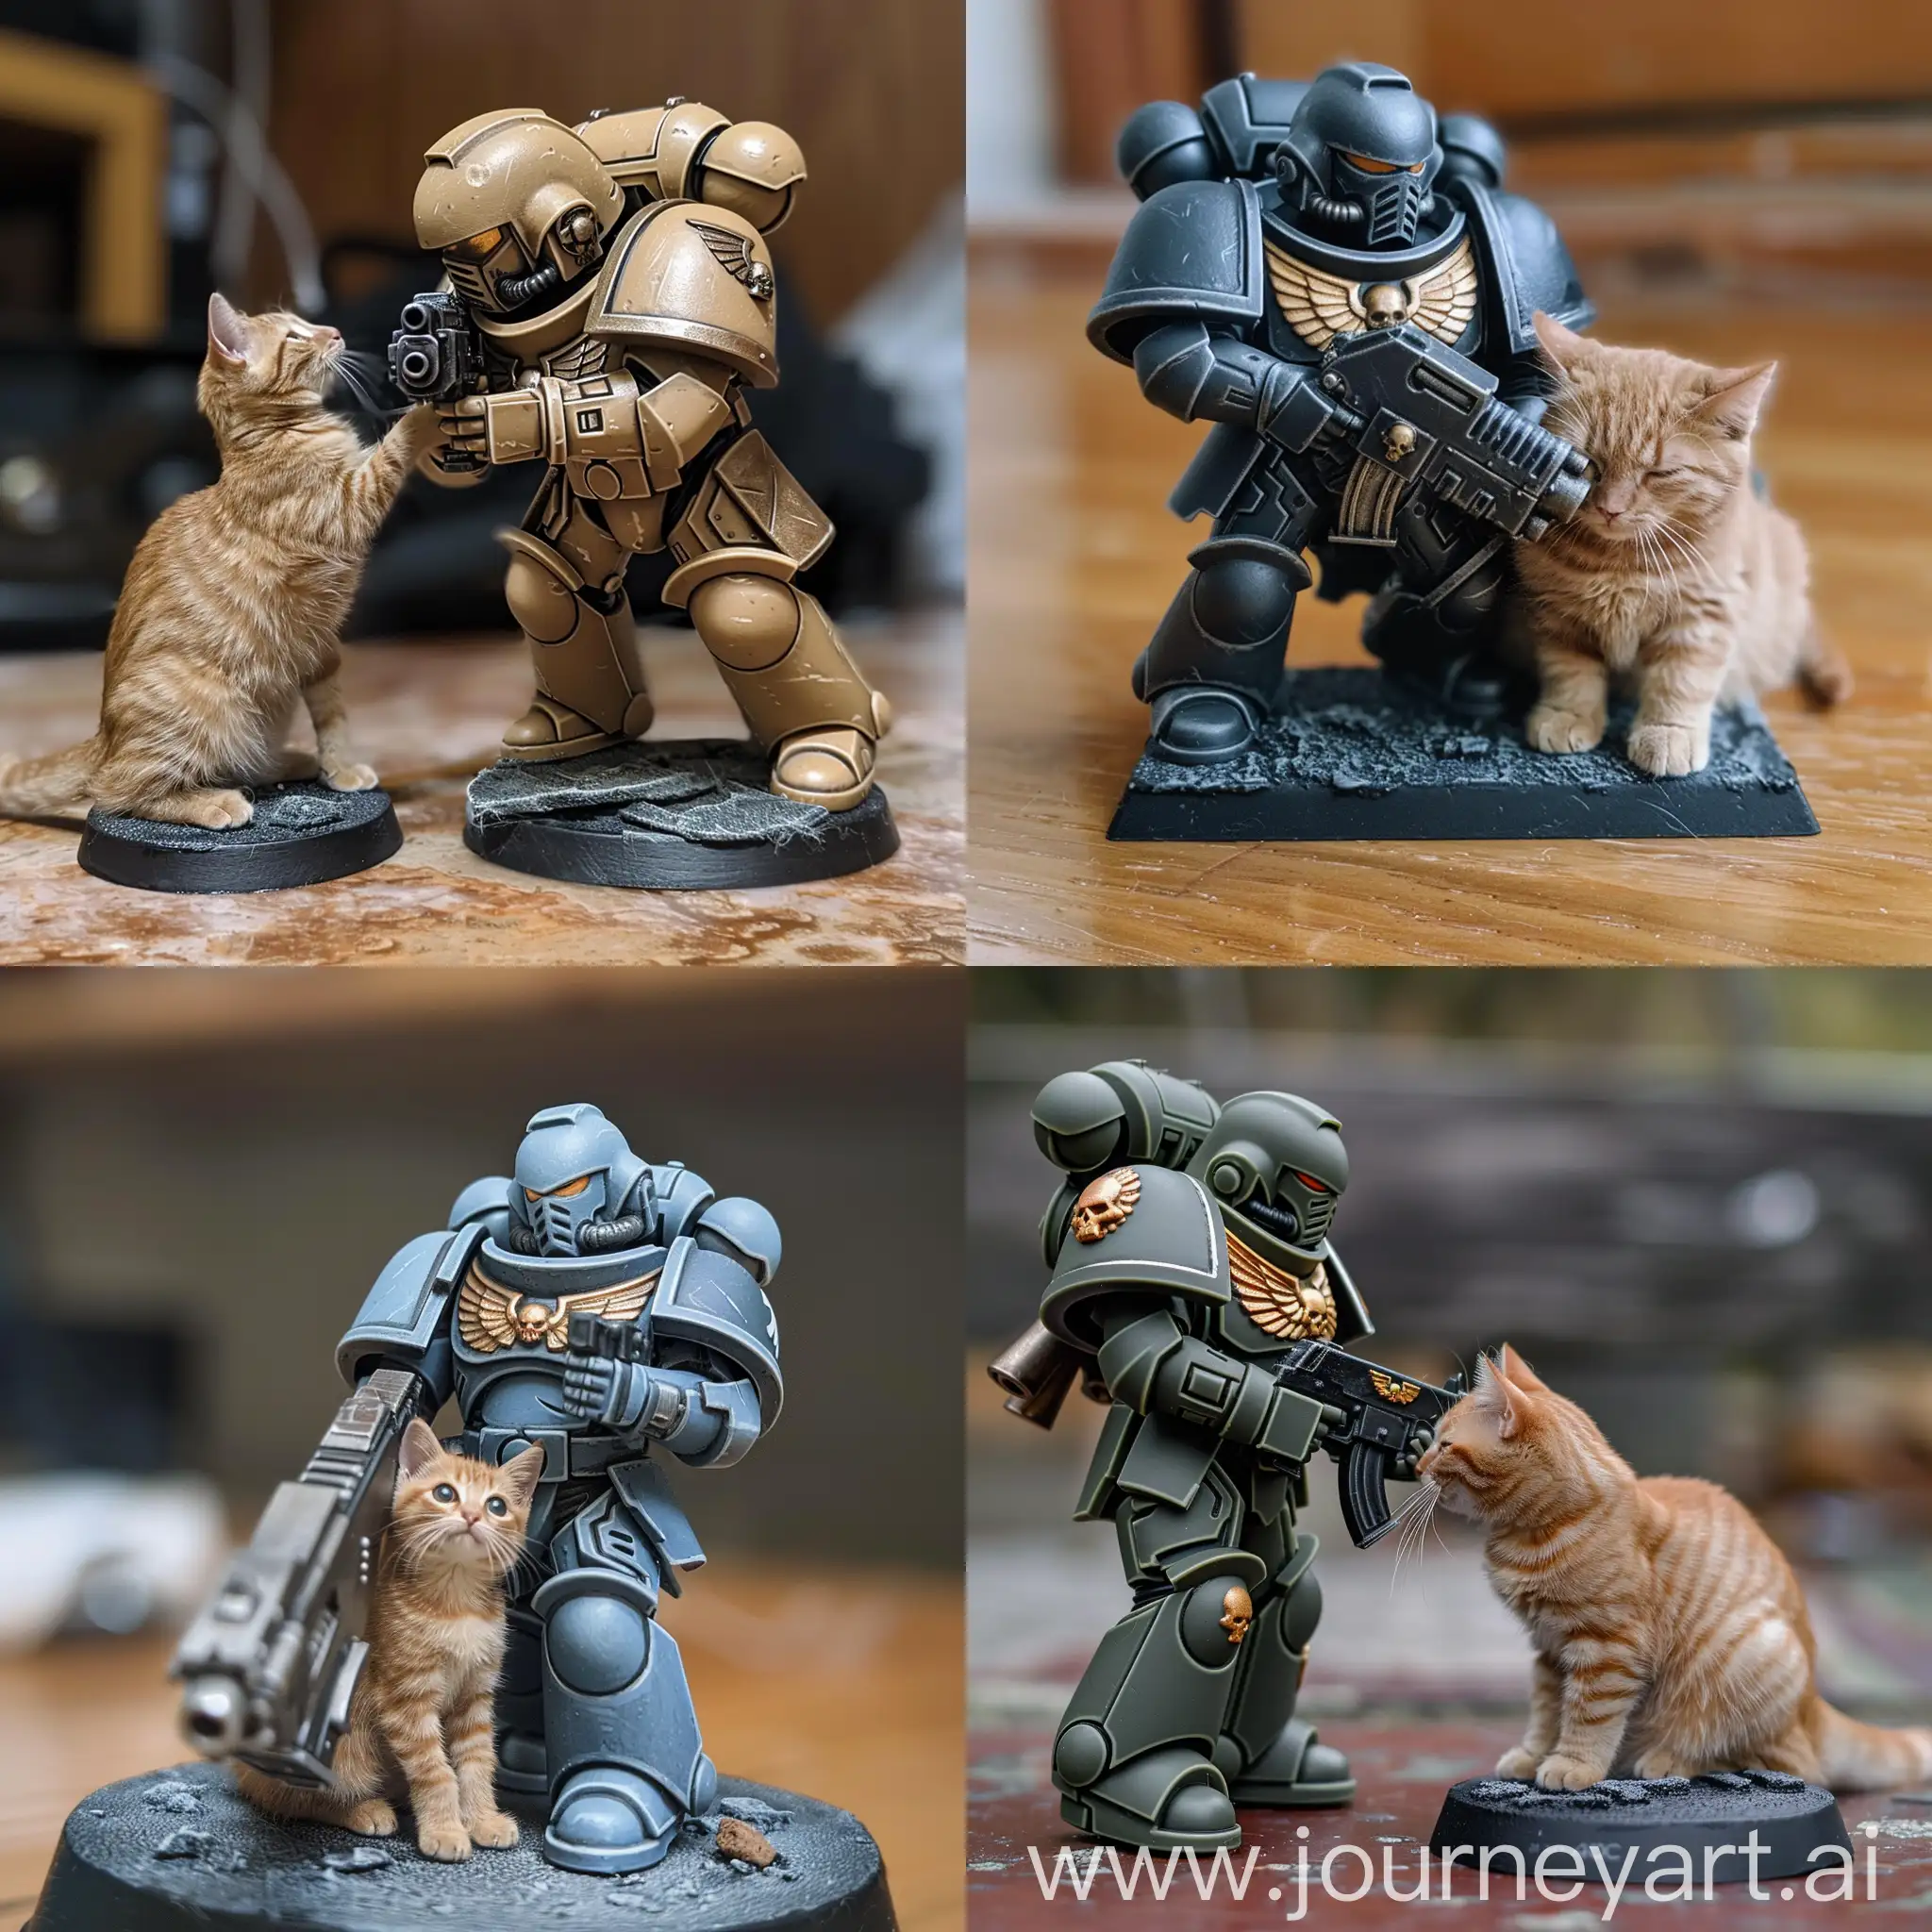 Space Marine from Warhammer 40K pet a cat